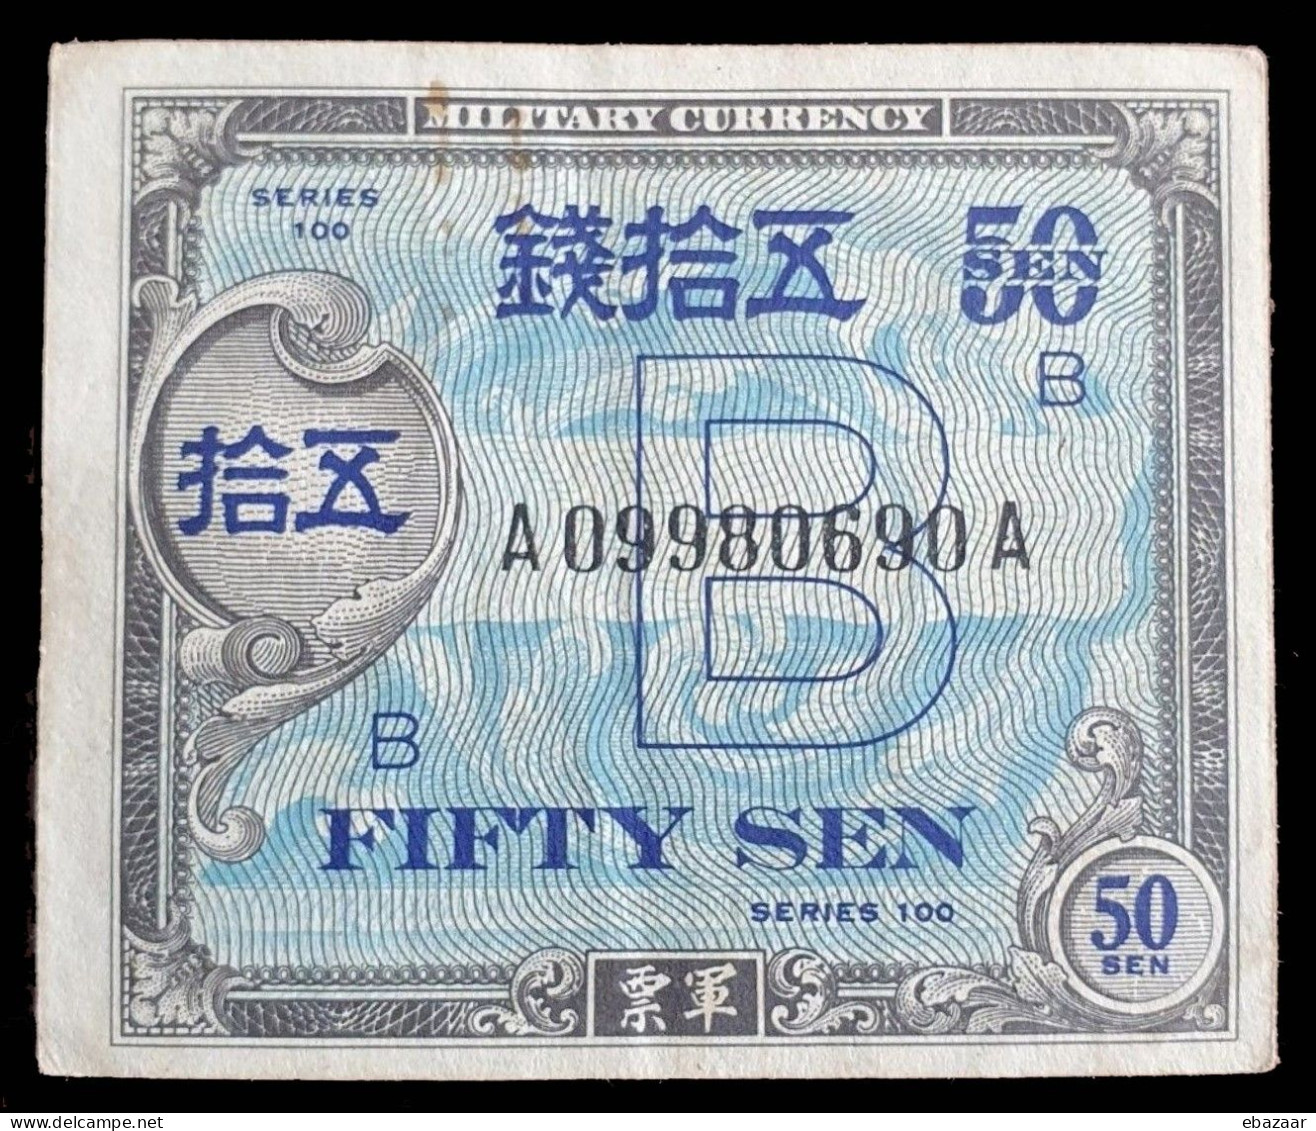 Japan 1945 Banknote Allied Military Command 50 Sen P-65 With "B" In Underprint + FREE GIFT - Japan